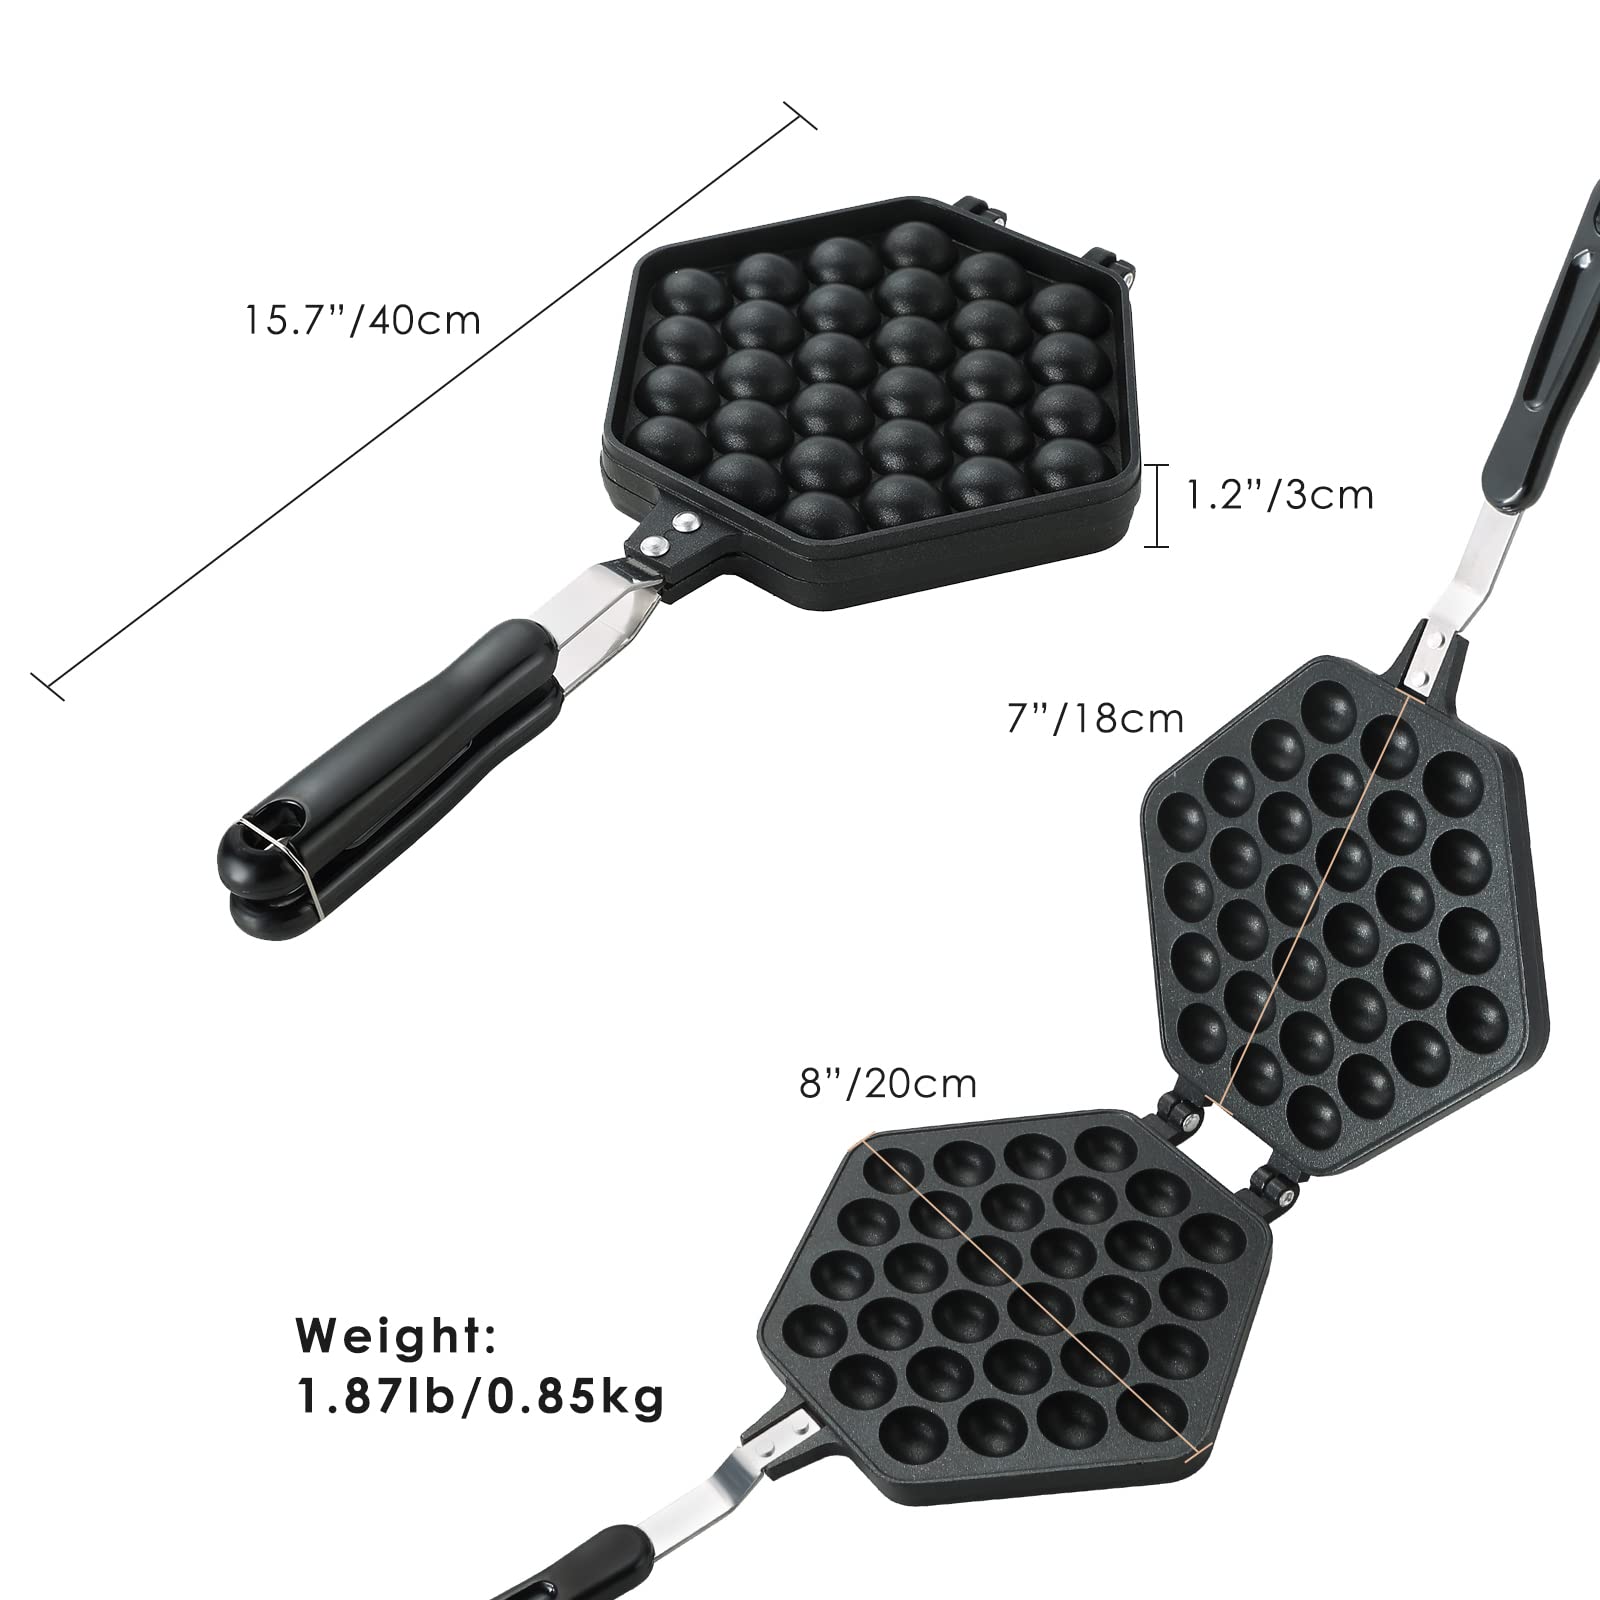 MAOPINER Bubble Waffle Maker Pan Waffle Cake Mold Pot Non-stick Double Side Egg Waffle Maker for Breakfast Lunch Household Cafe Restaurant Cake Shop